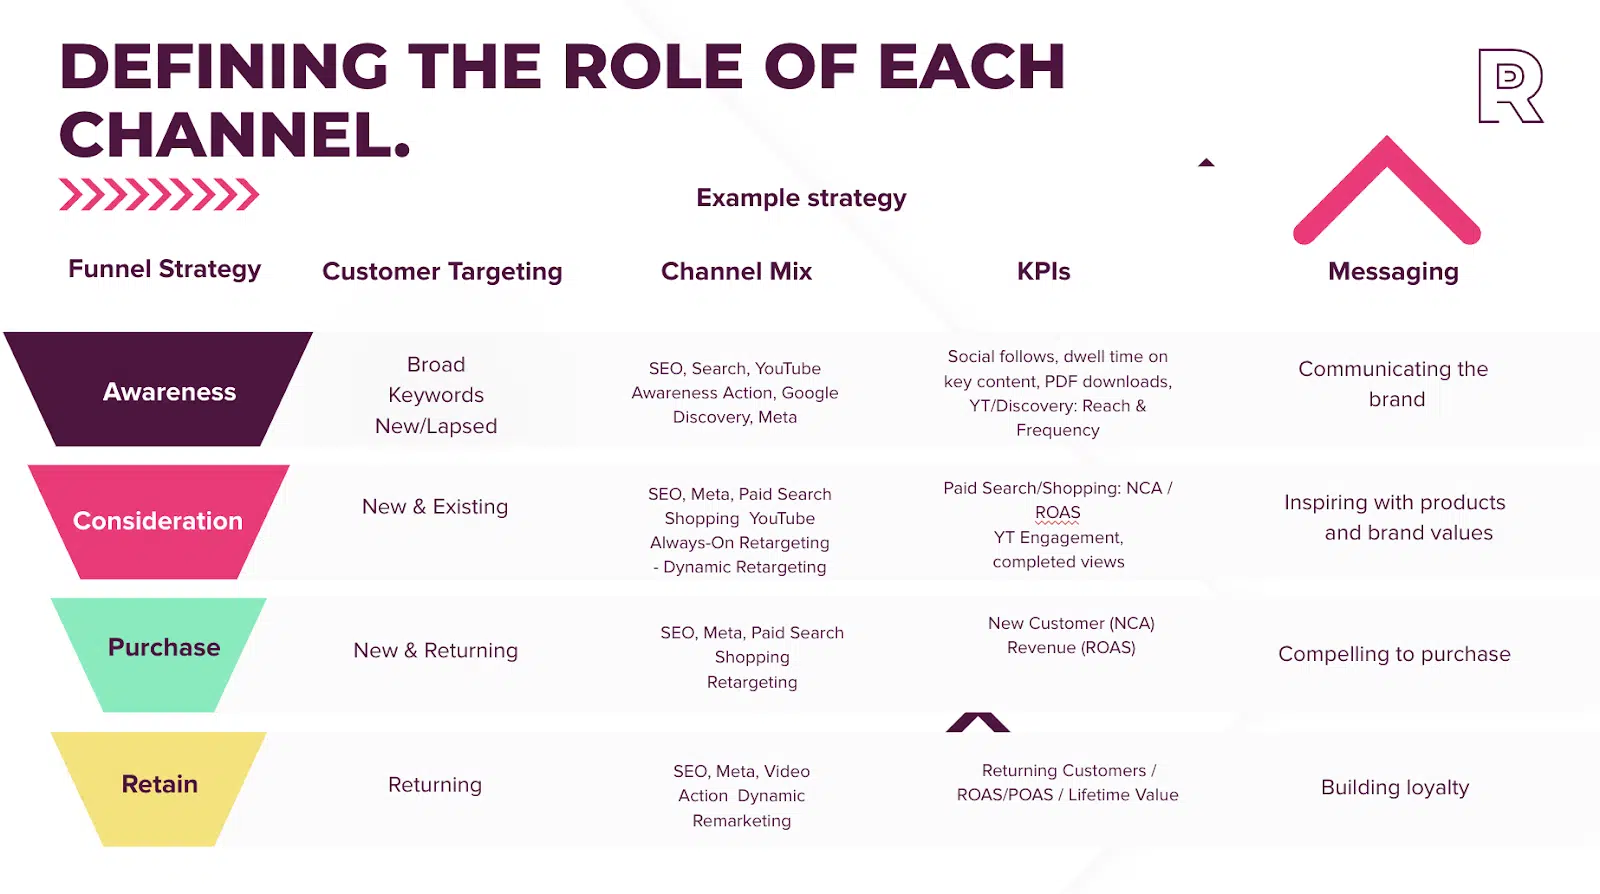 Defining the role of each channel